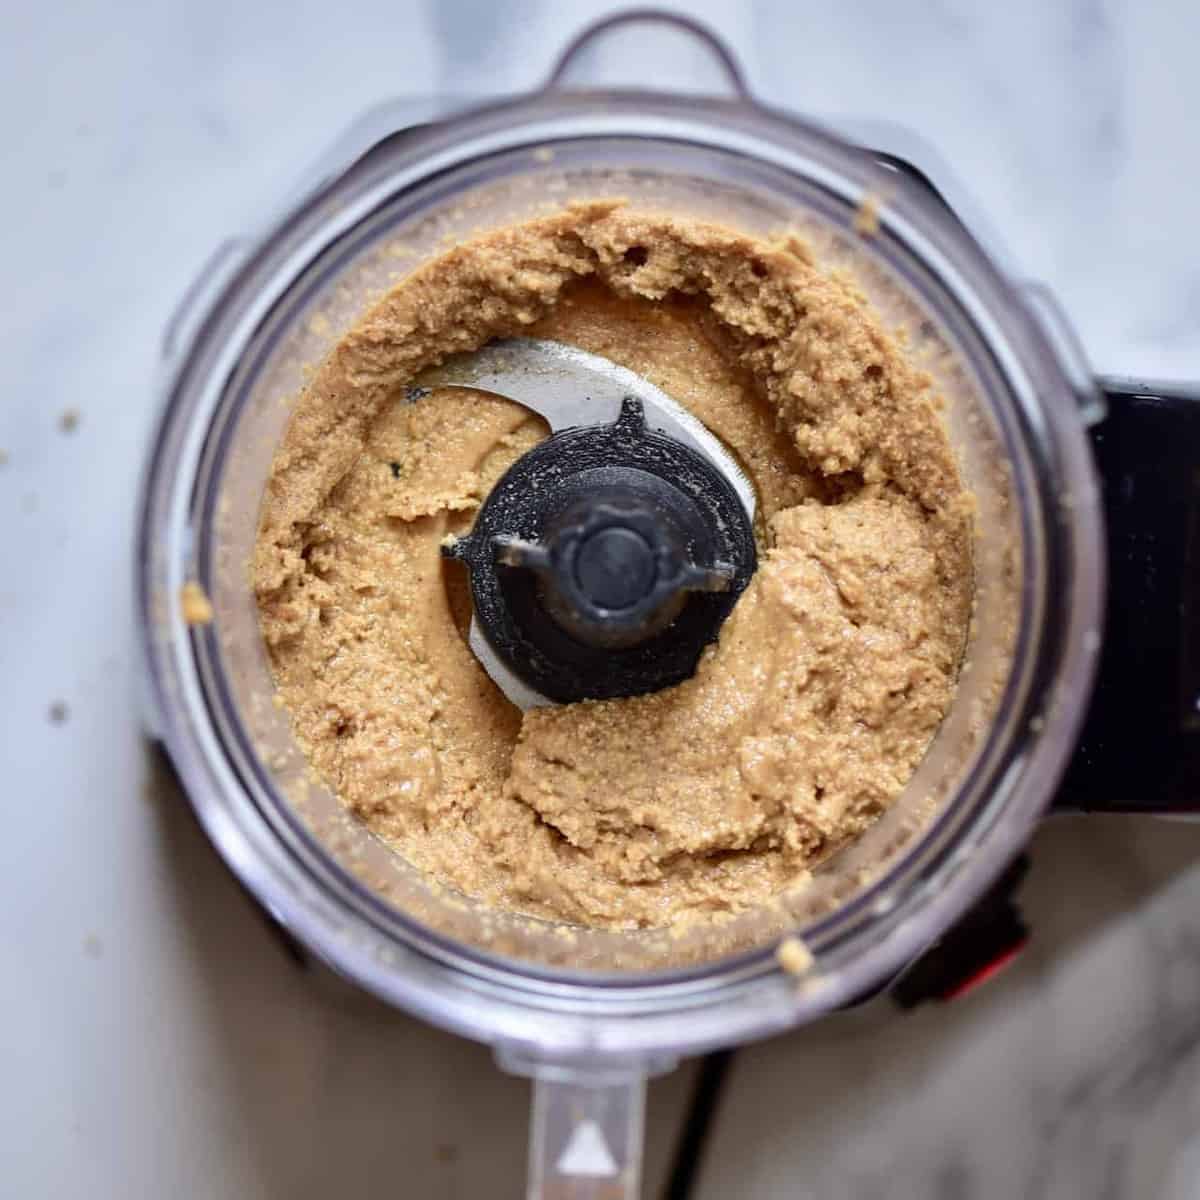 A delicious, Vegan one ingredient homemade brazil nut butter recipe with flavoured brazil nut butter options, health benefits of brazil nuts and brazil nut butter uses!